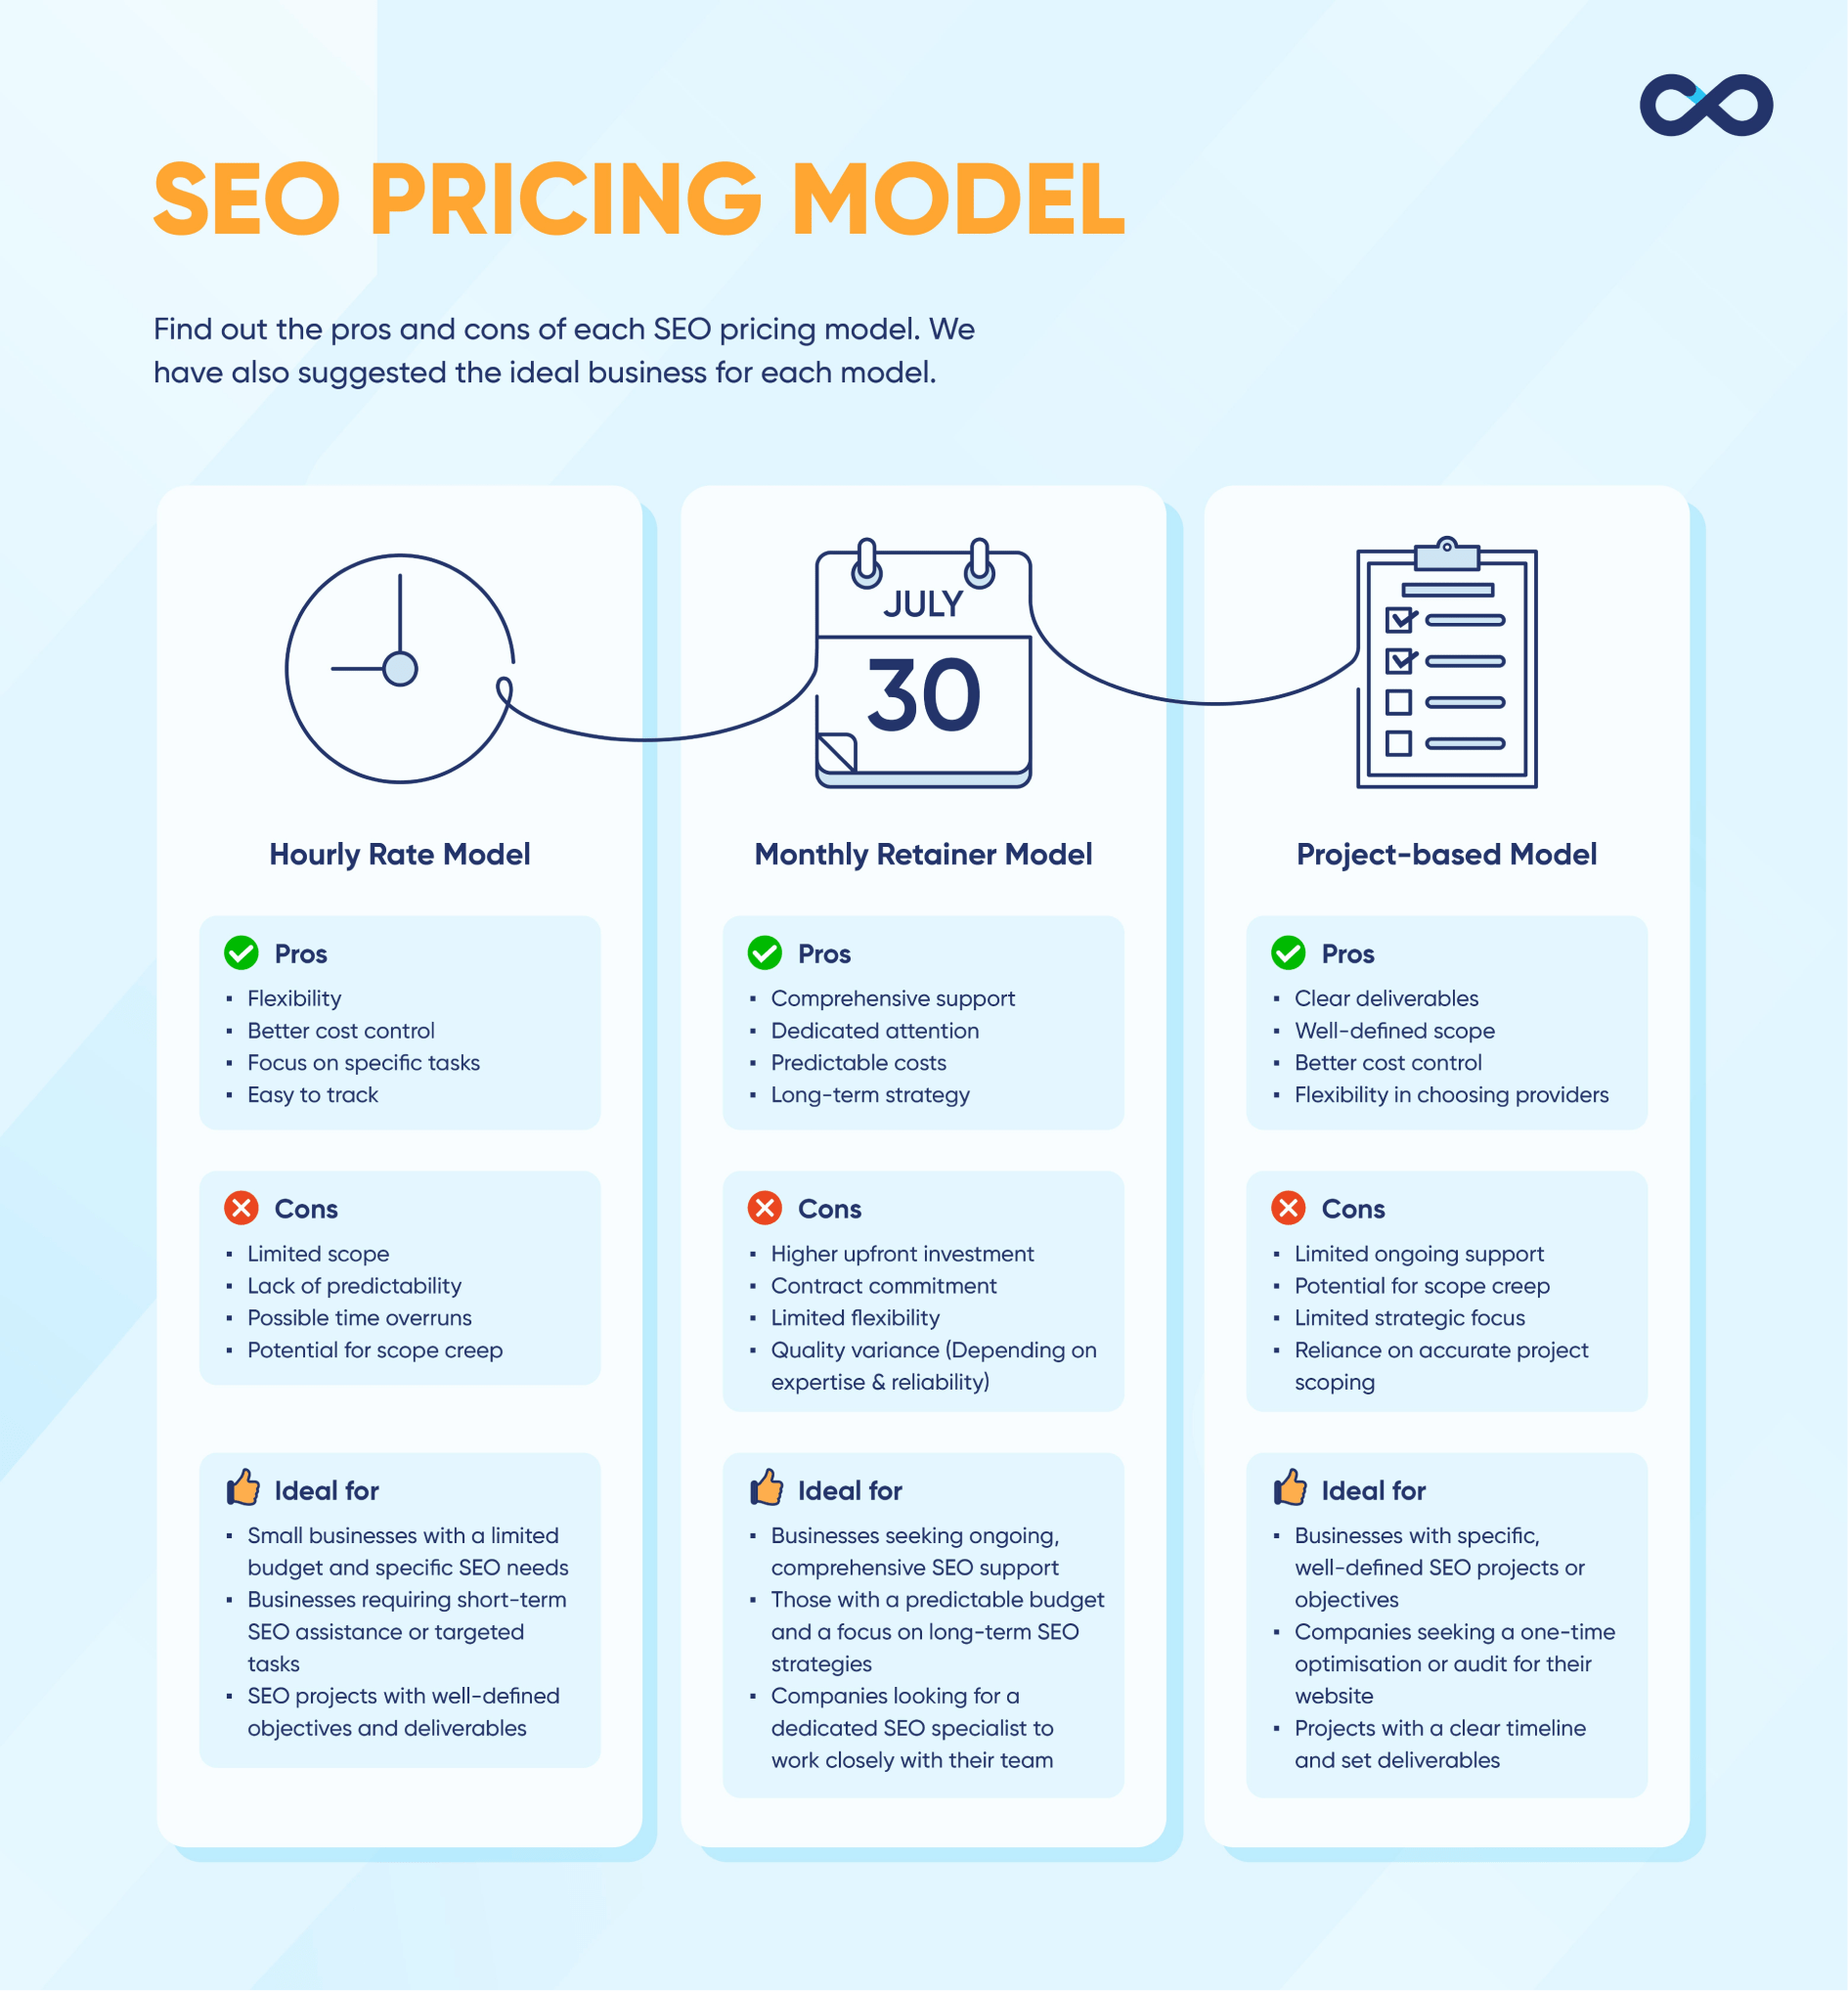 seo pricing model comparison chart that includes pros, cons and ideal audiences